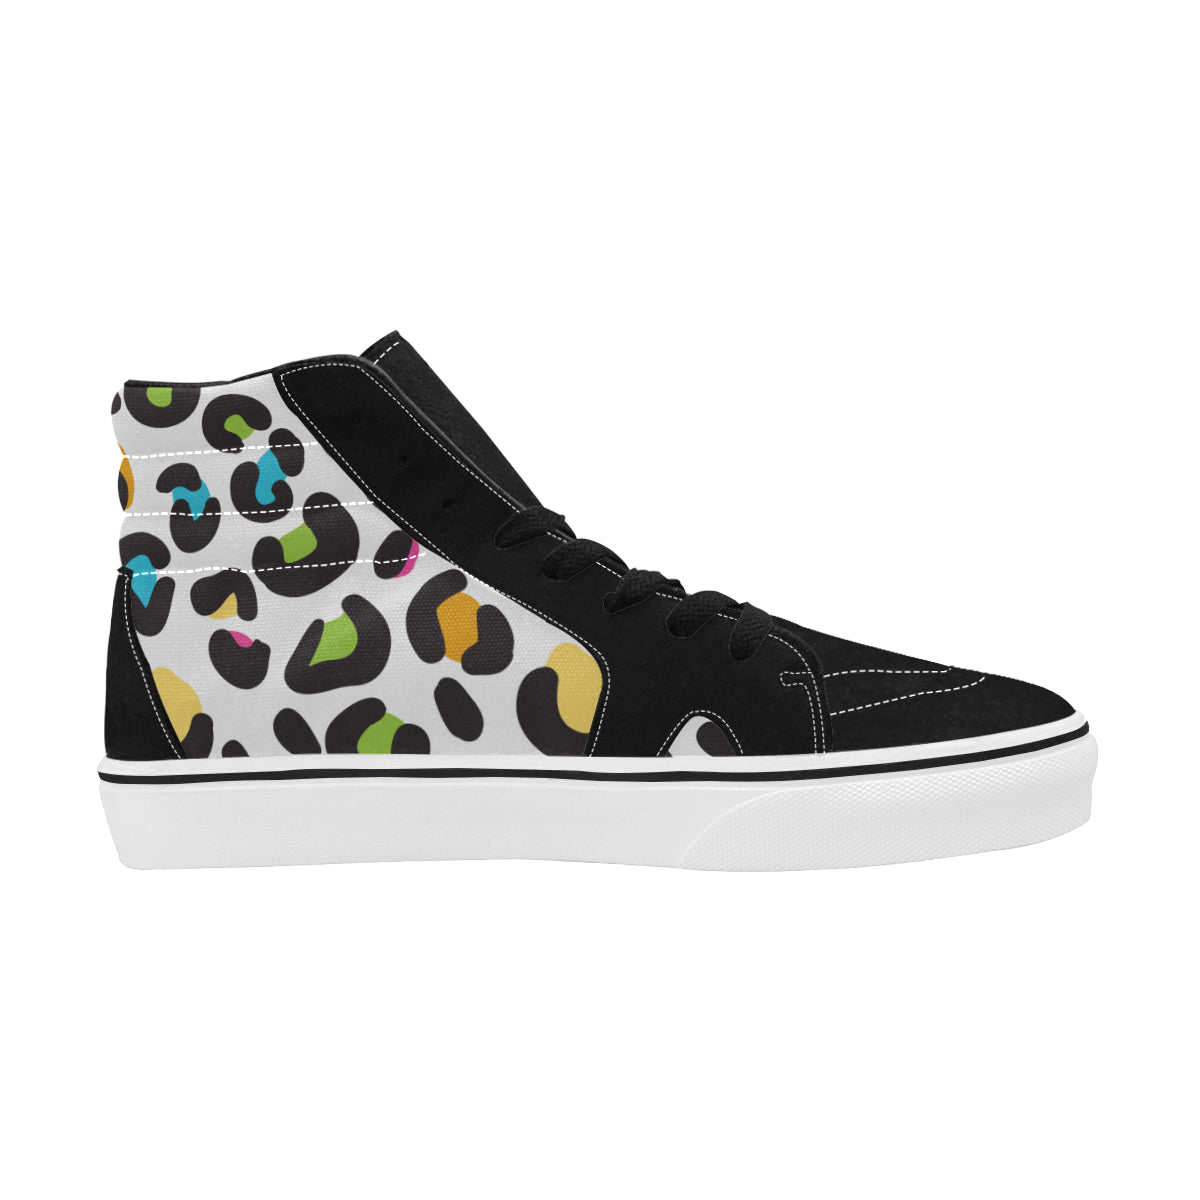 THE CABOODLE SKATER GIRLS' SNEAKERS (sz 4.5-12)